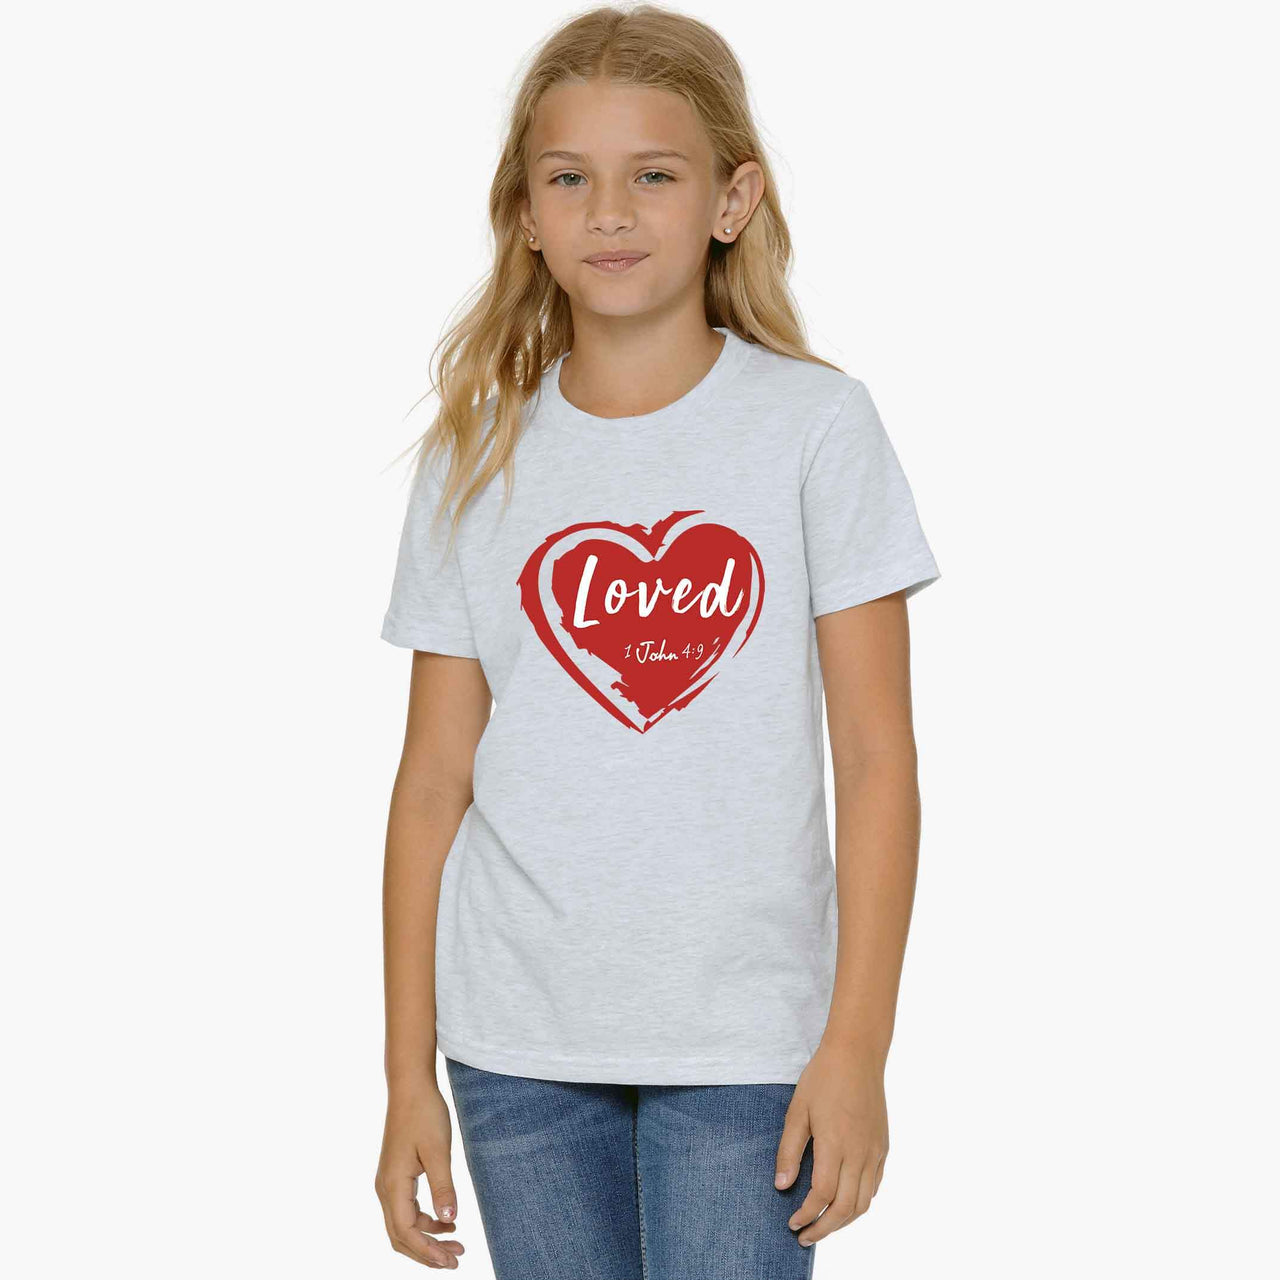 Loved Youth T Shirt